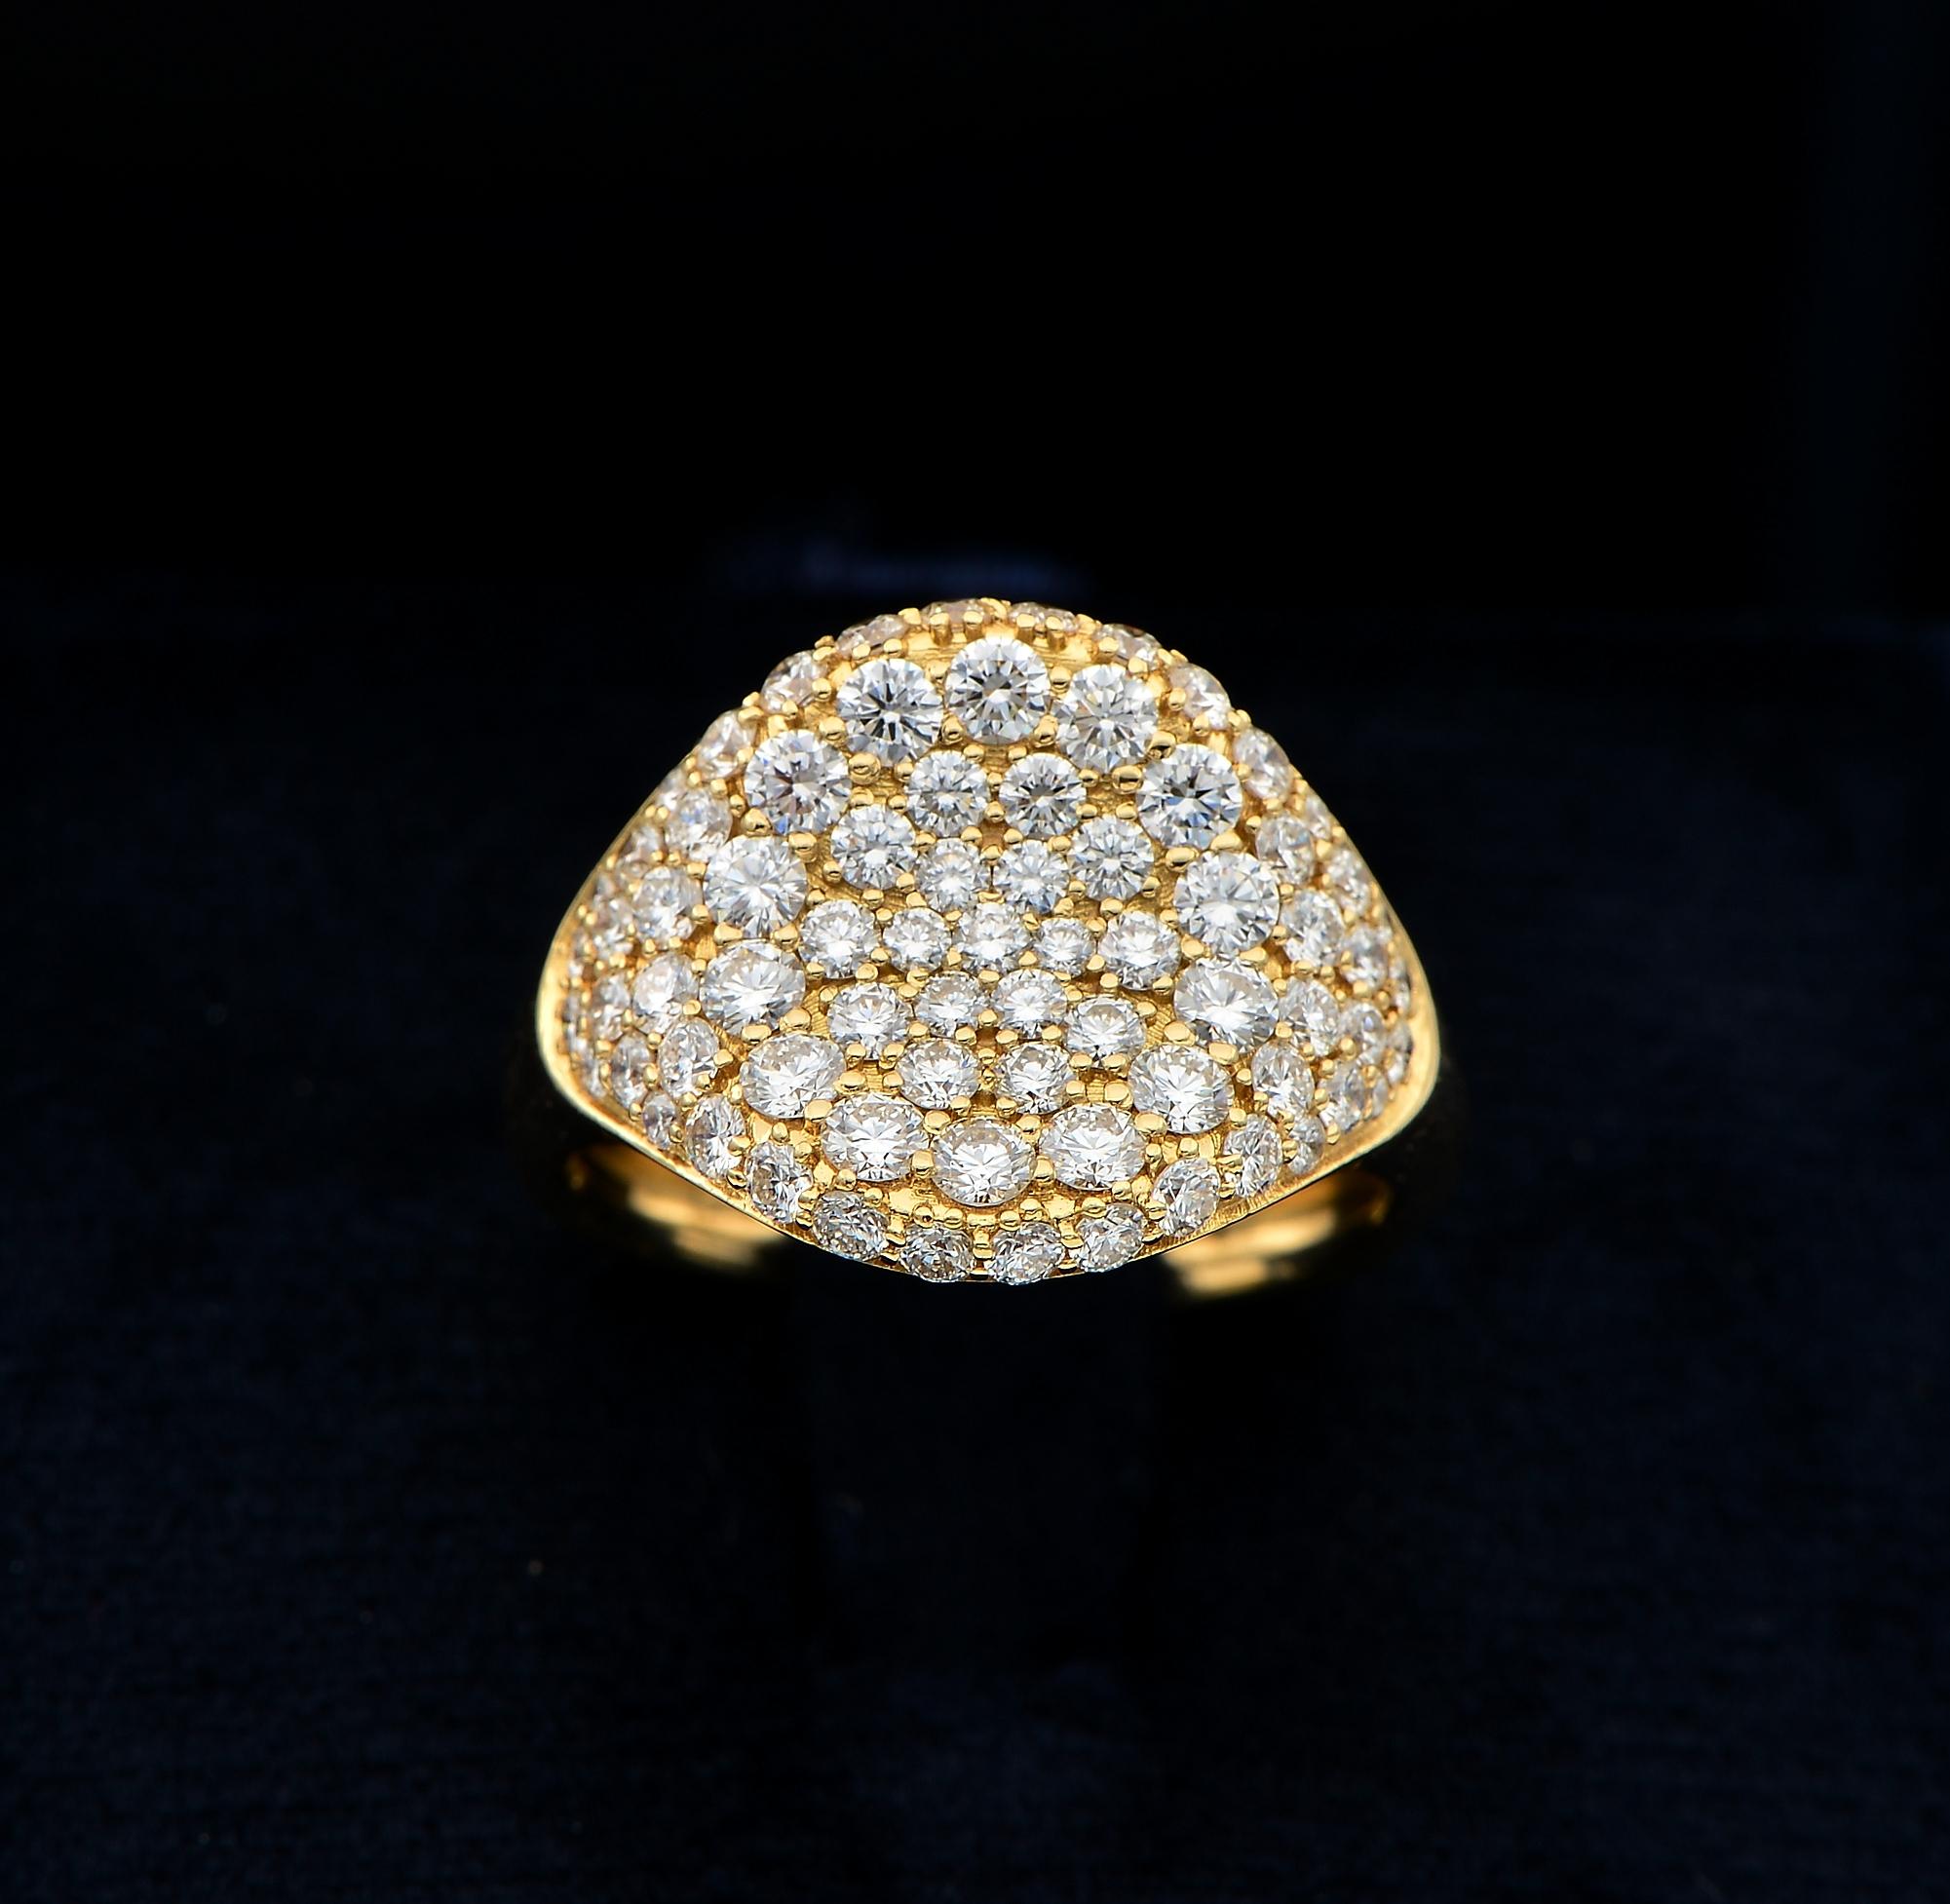 The Finest Jewellery
Highest in quality, contemporary, hand crafted of solid 18 KT gold, beautifully designed signet ring
Set throughout by a selection of F/VVS round brilliant cut Diamonds shooting white sparkle – 2.0 TCW
Tested for gold